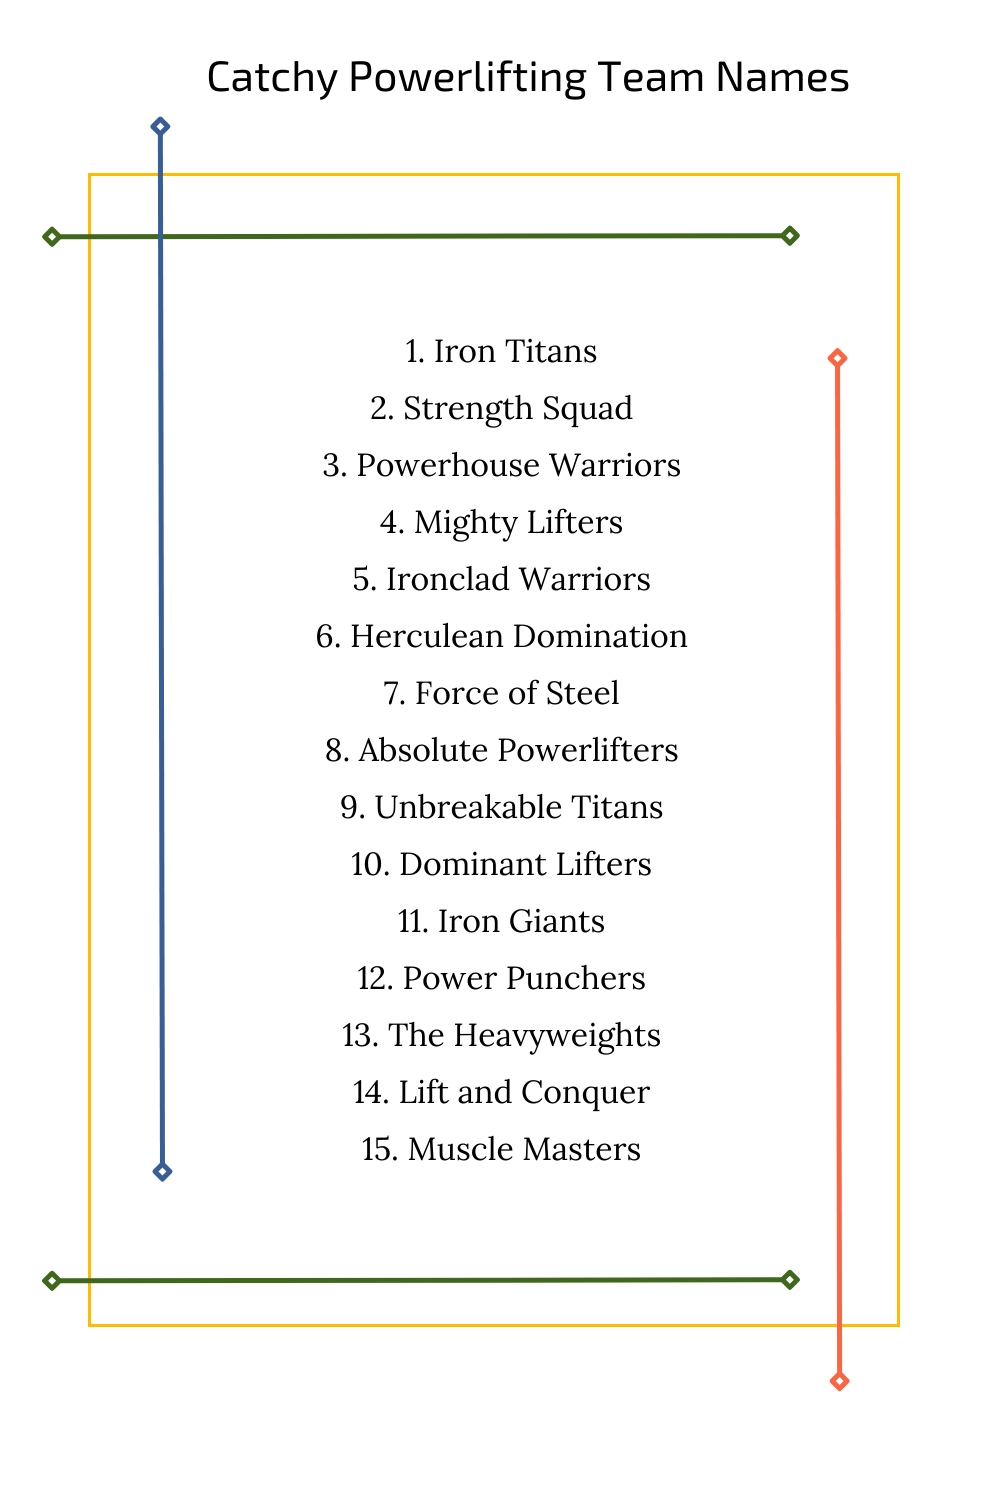 Catchy Powerlifting Team Names